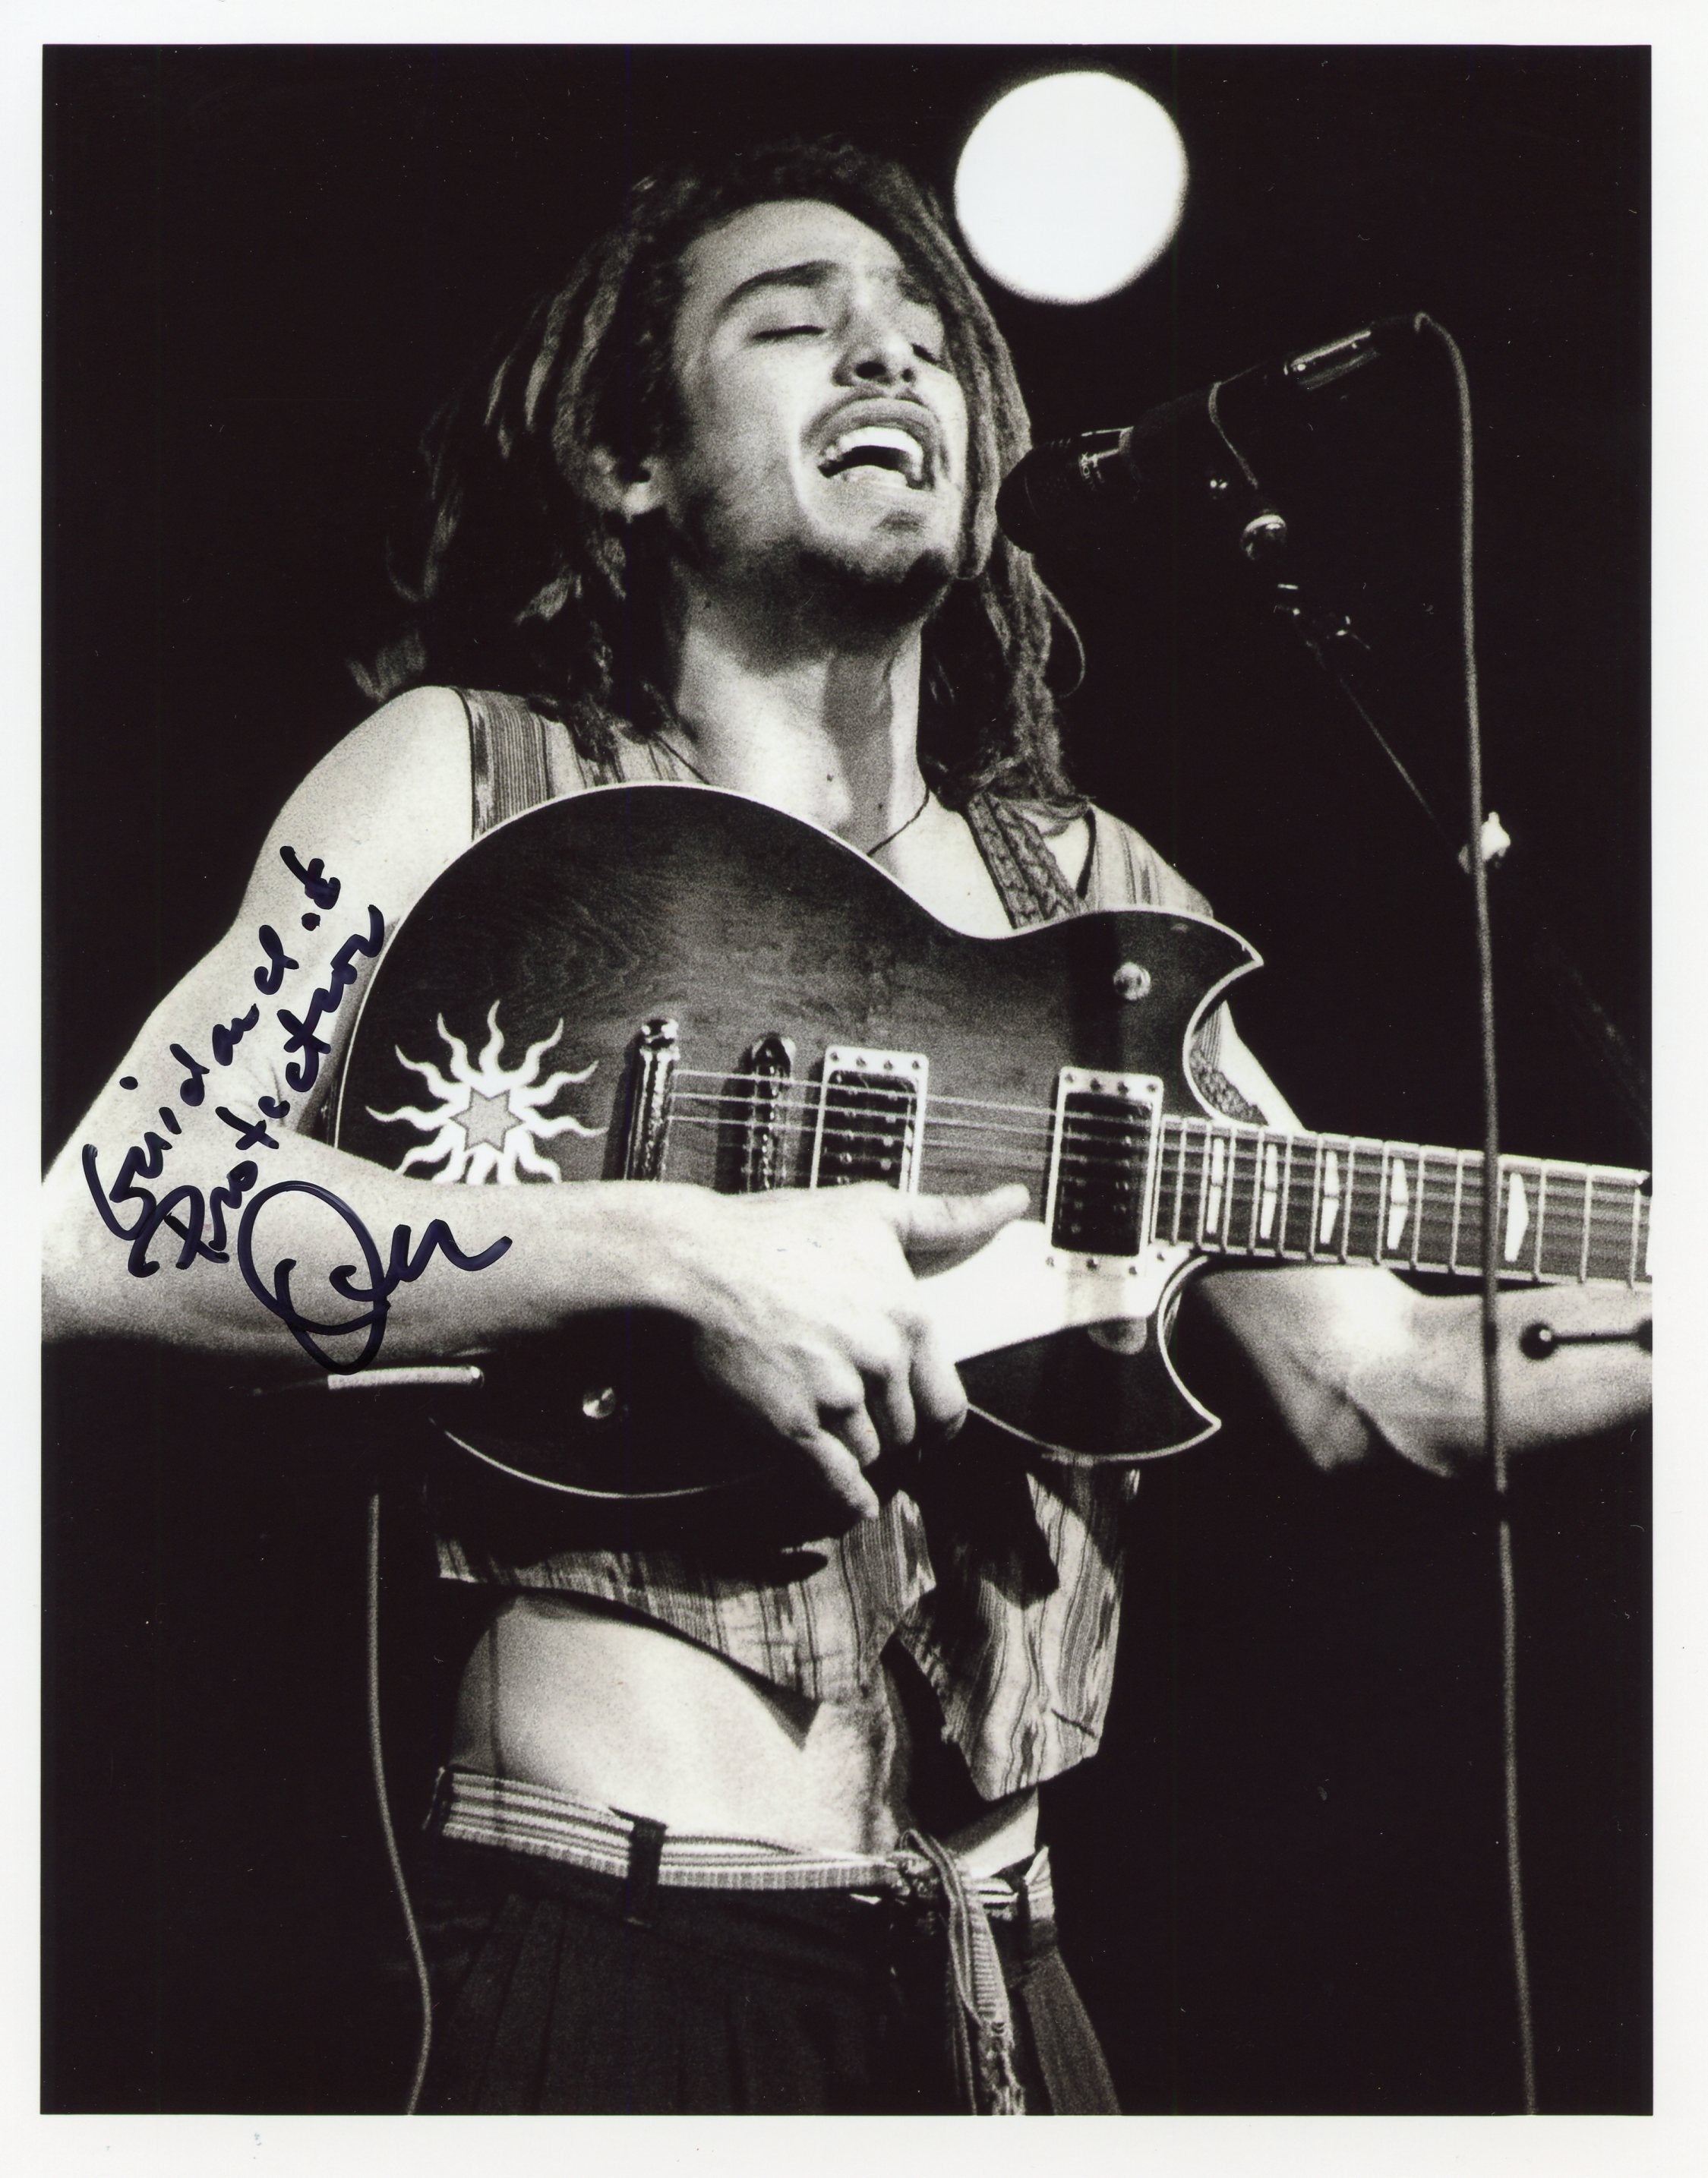 QUINO of the Reggae band BIG MOUNTAIN -  AUTOGRAPHED ORIGINAL 8" X 10" PHOTO (COLLECTORS COPY/ LIMITED EDITION)